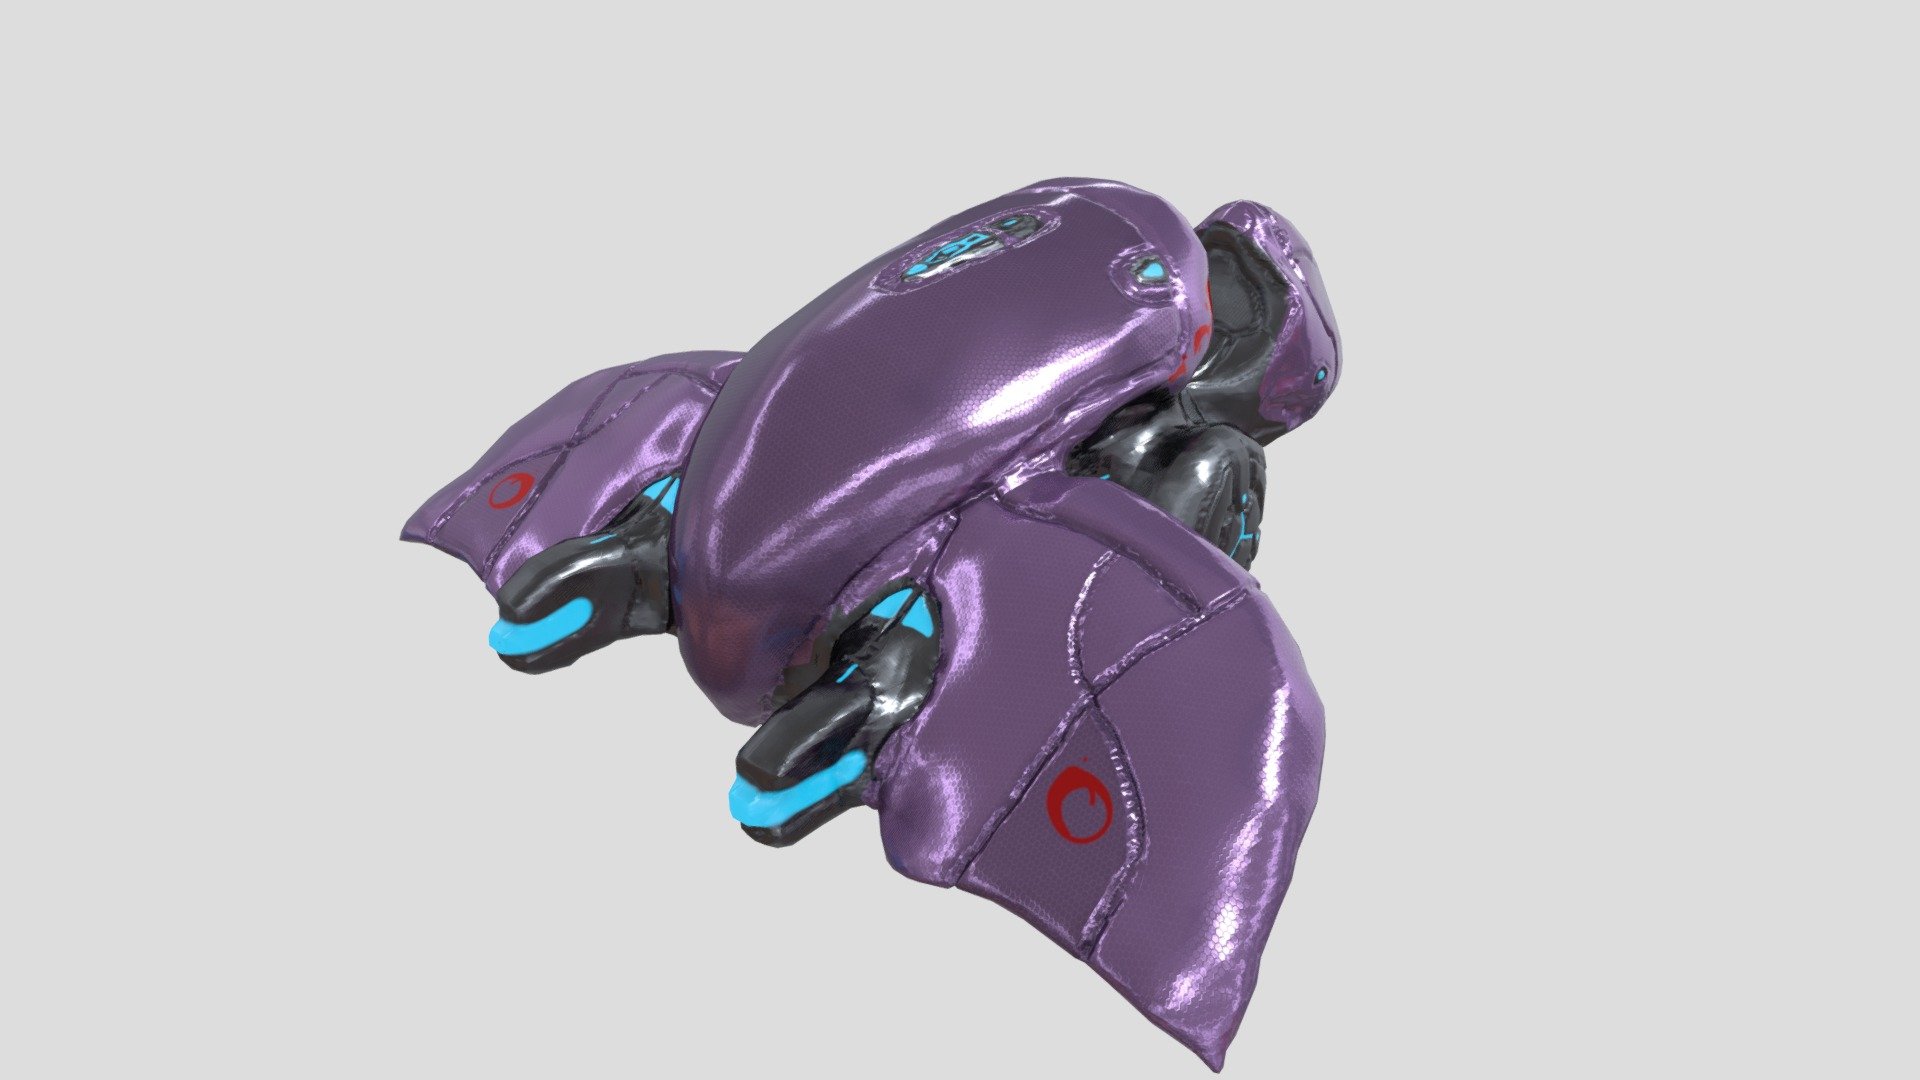 Model of a Ghost from the Halo series for the third assignment in my modelling class at university. UV is extremely messy due to the retopo not being ideal, but that aside, I'm extremely happy with how it turned out, looking incredibly accurate to the in-game model and material. 

Sculpted and modelled in Blender, purple hexagon material made in Substance Designer, textured in Substance Painter 3d model